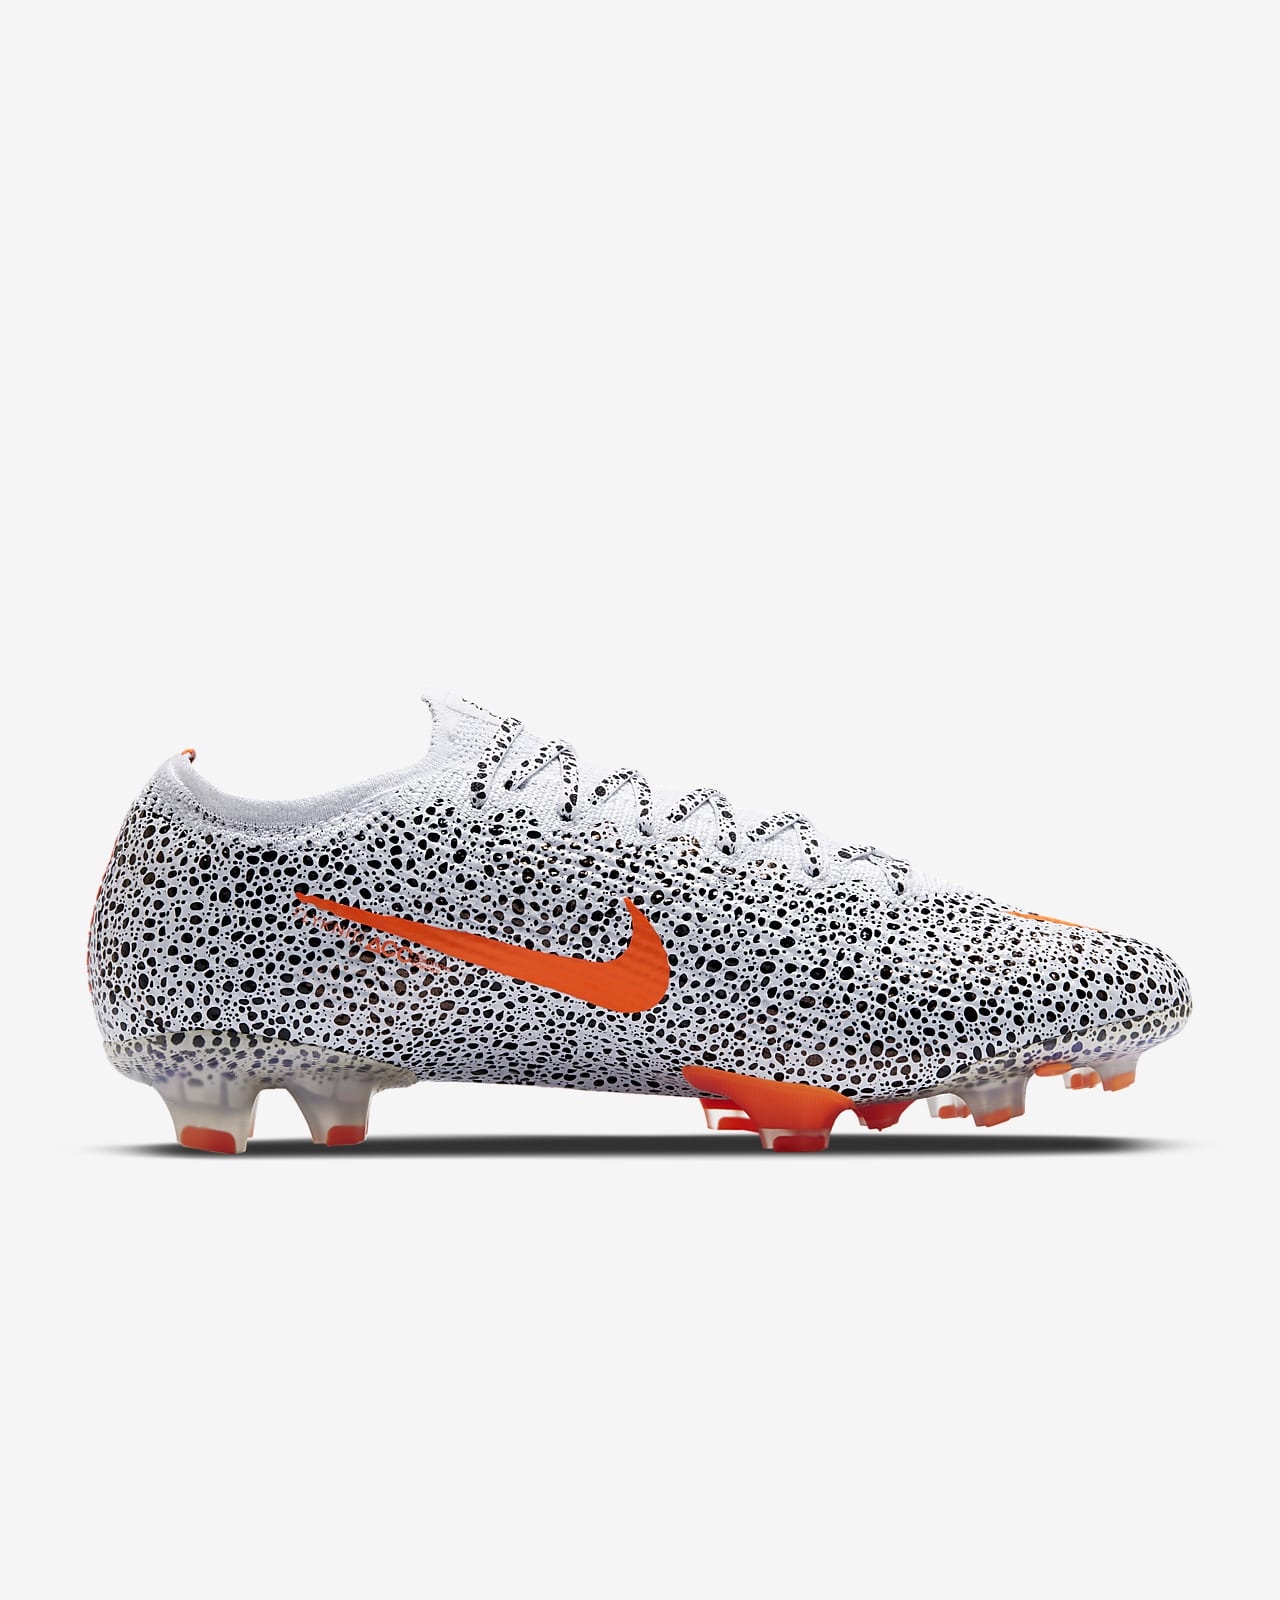 nike mercurial superfly 7 elite cr7 fg soccer cleat